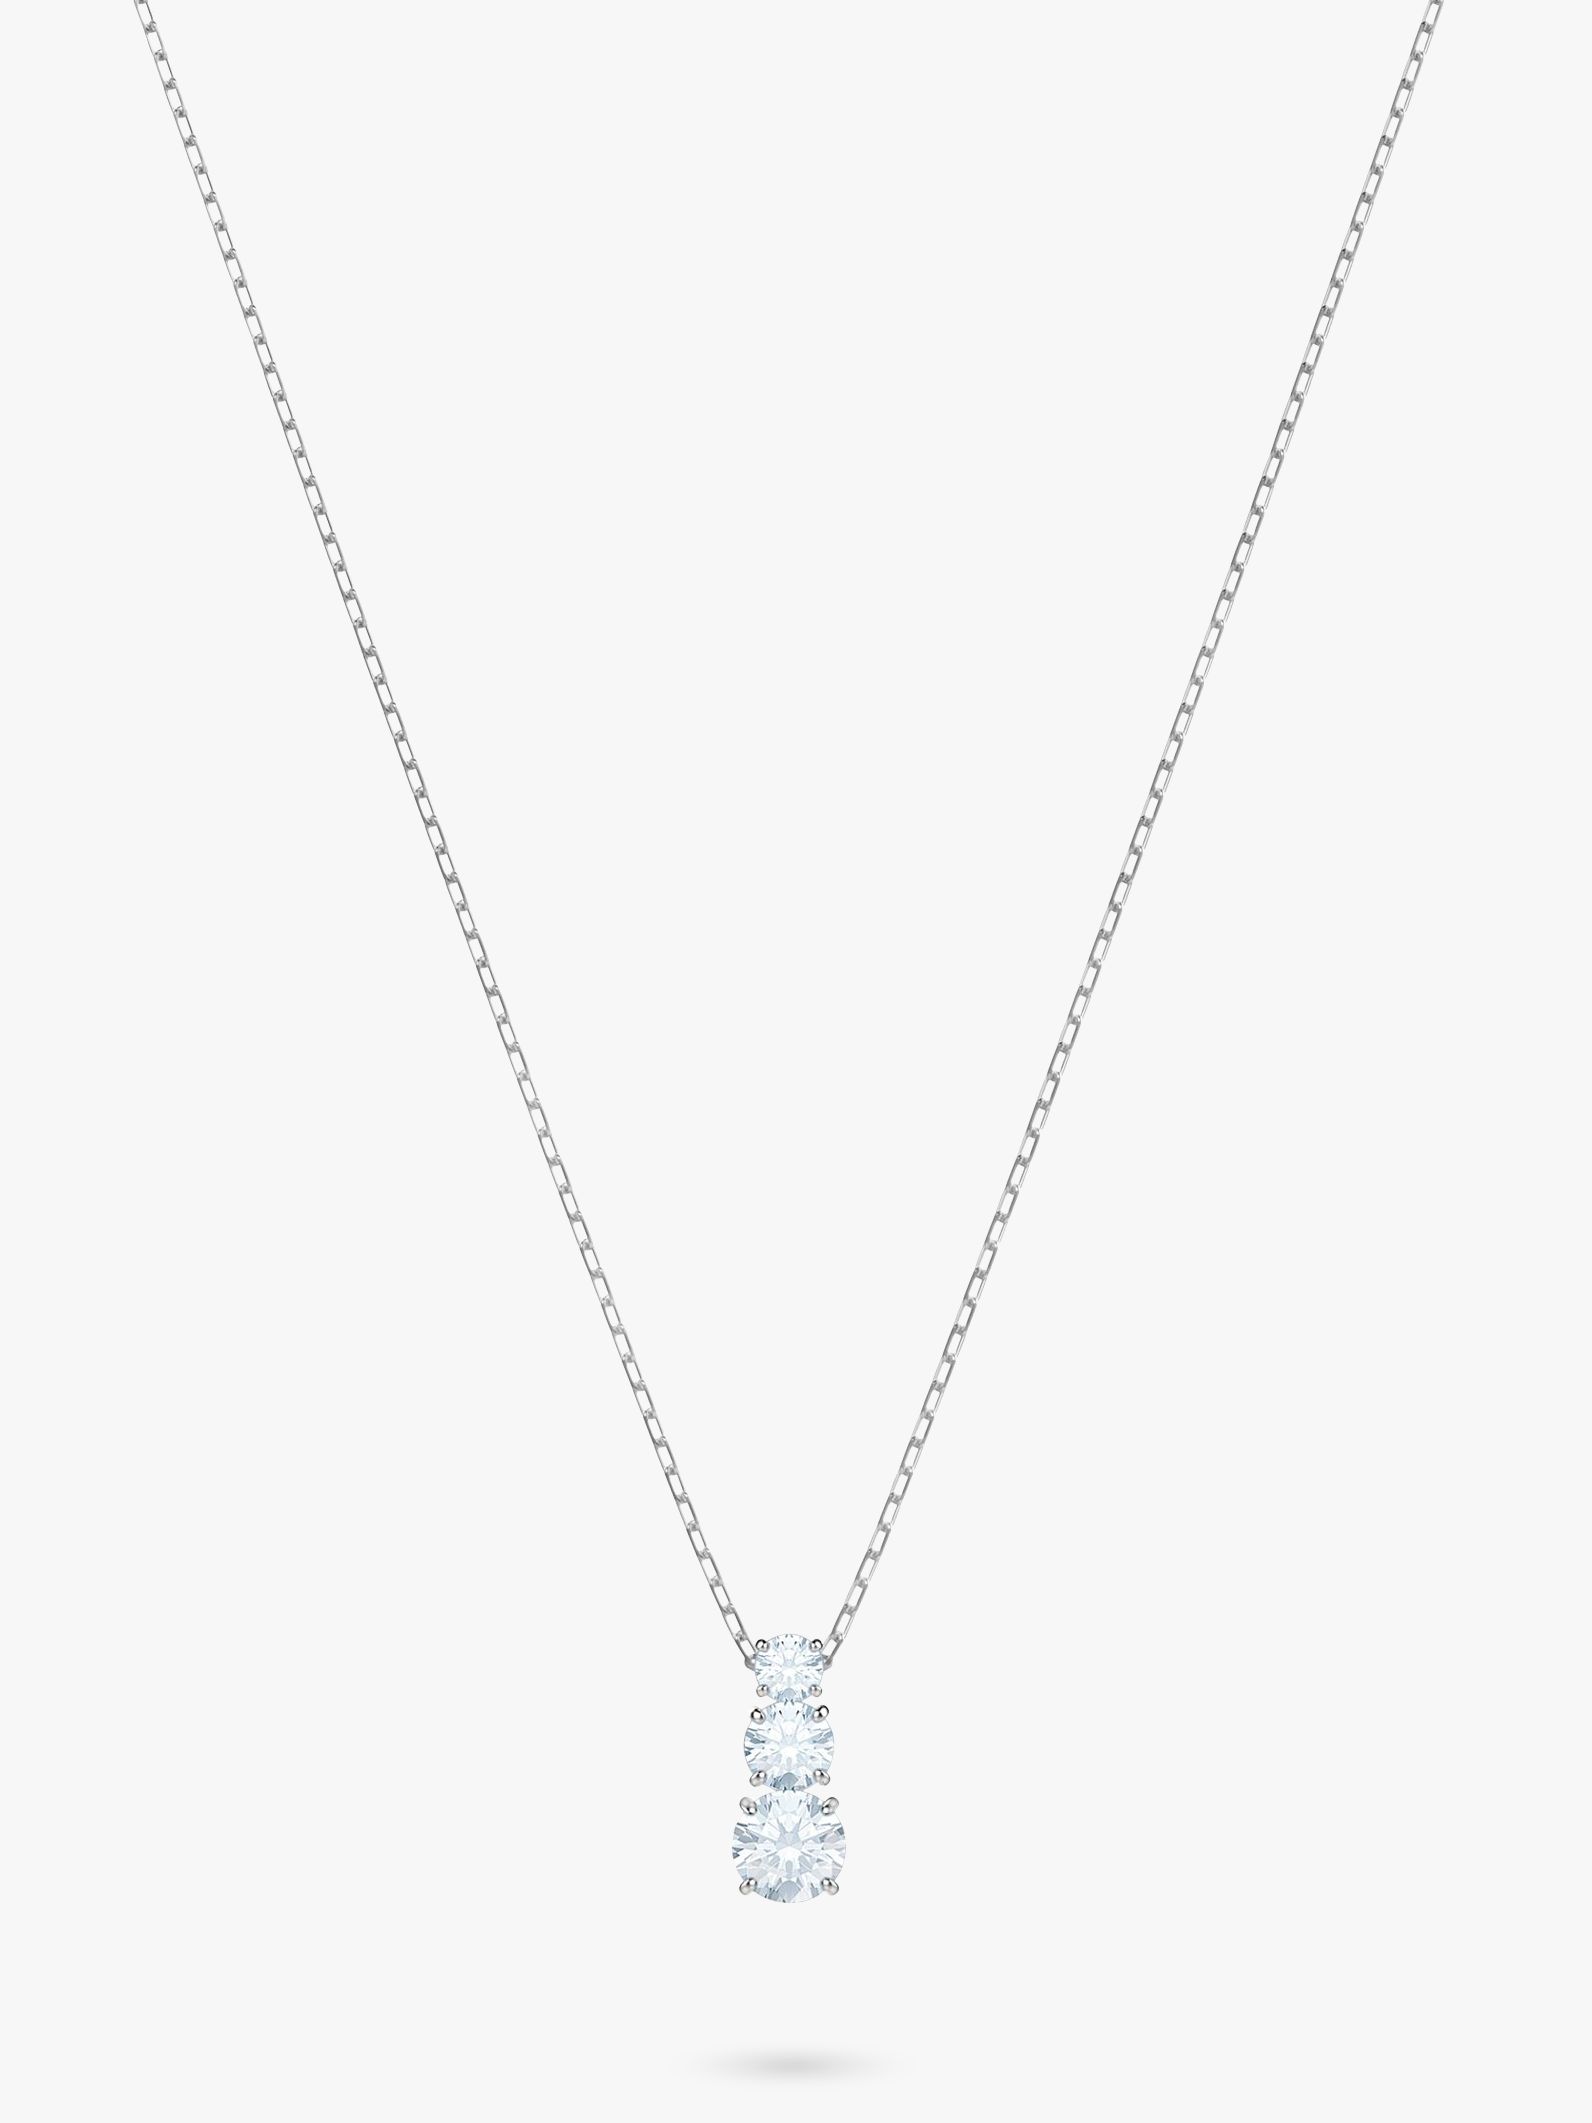 Swarovski Attract Triple Crystal Pendant Necklace, Silver/Clear at John ...